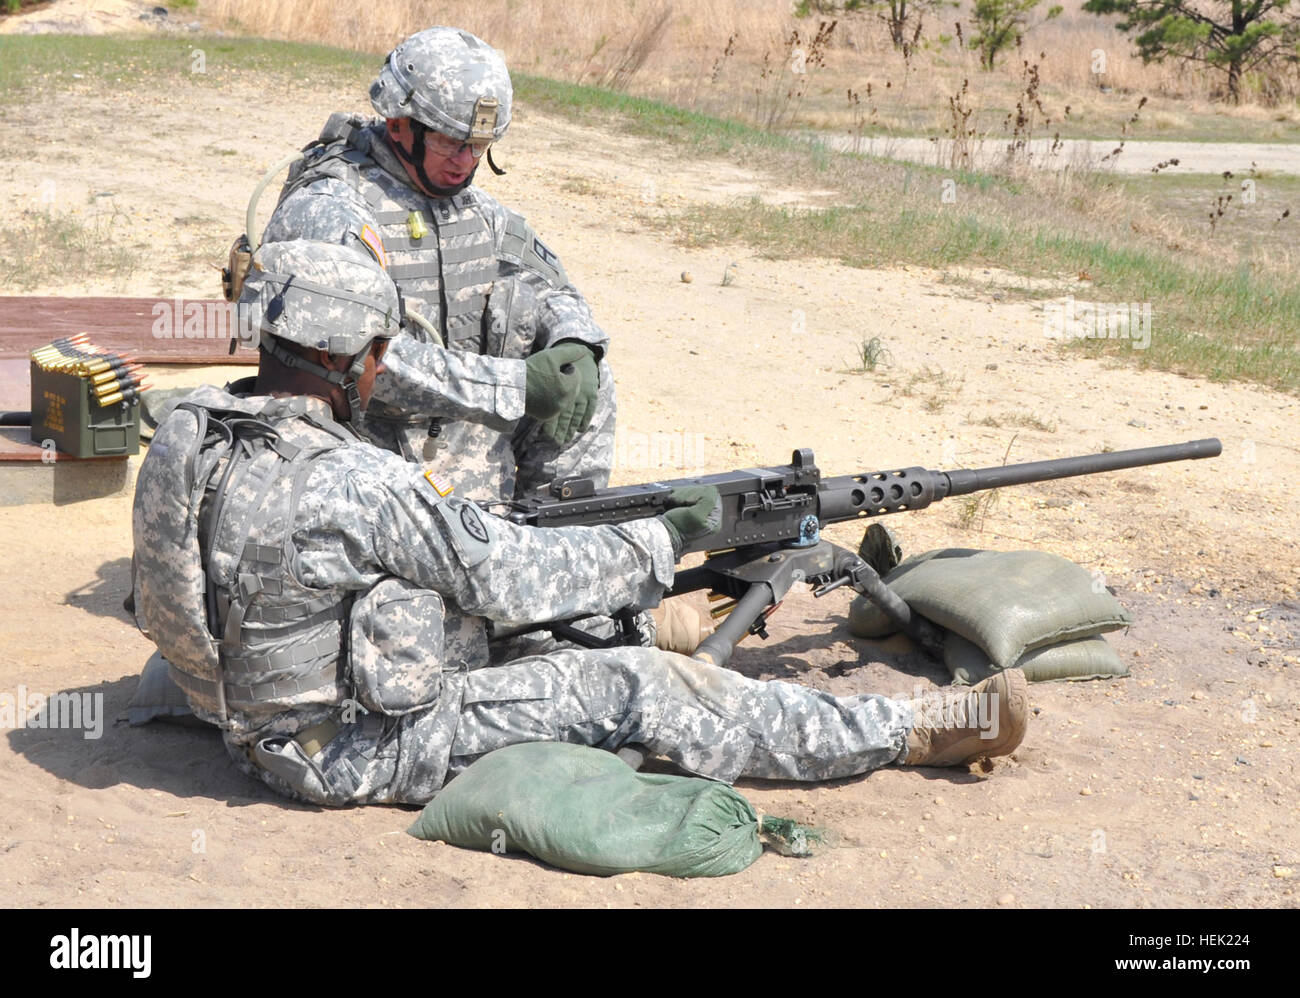 NCO winner checks M-2 machine gun 100408-A-4429M-007 Sgt. 1st Class Bobby Williams, from Water Valley, Miss., and a member of the 1st of the 307th Battalion, 72nd Field Artillery (FA) Brigade, checks his M-2, .50 caliber machine gun before firing at targets at Army Support Activity-Dix (ASA-Dix) during a part of the 2010 72nd FA Bde. NCO of the Year competition April 8. Williams won the event and will go on to compete at the 1st Army Division East level at Fort Knox, Ky., May 3-6. Next to Williams is his sponsor, Master Sgt. Phillip Johnson, from Hindman, Ky., and a member of the 1st of the 30 Stock Photo